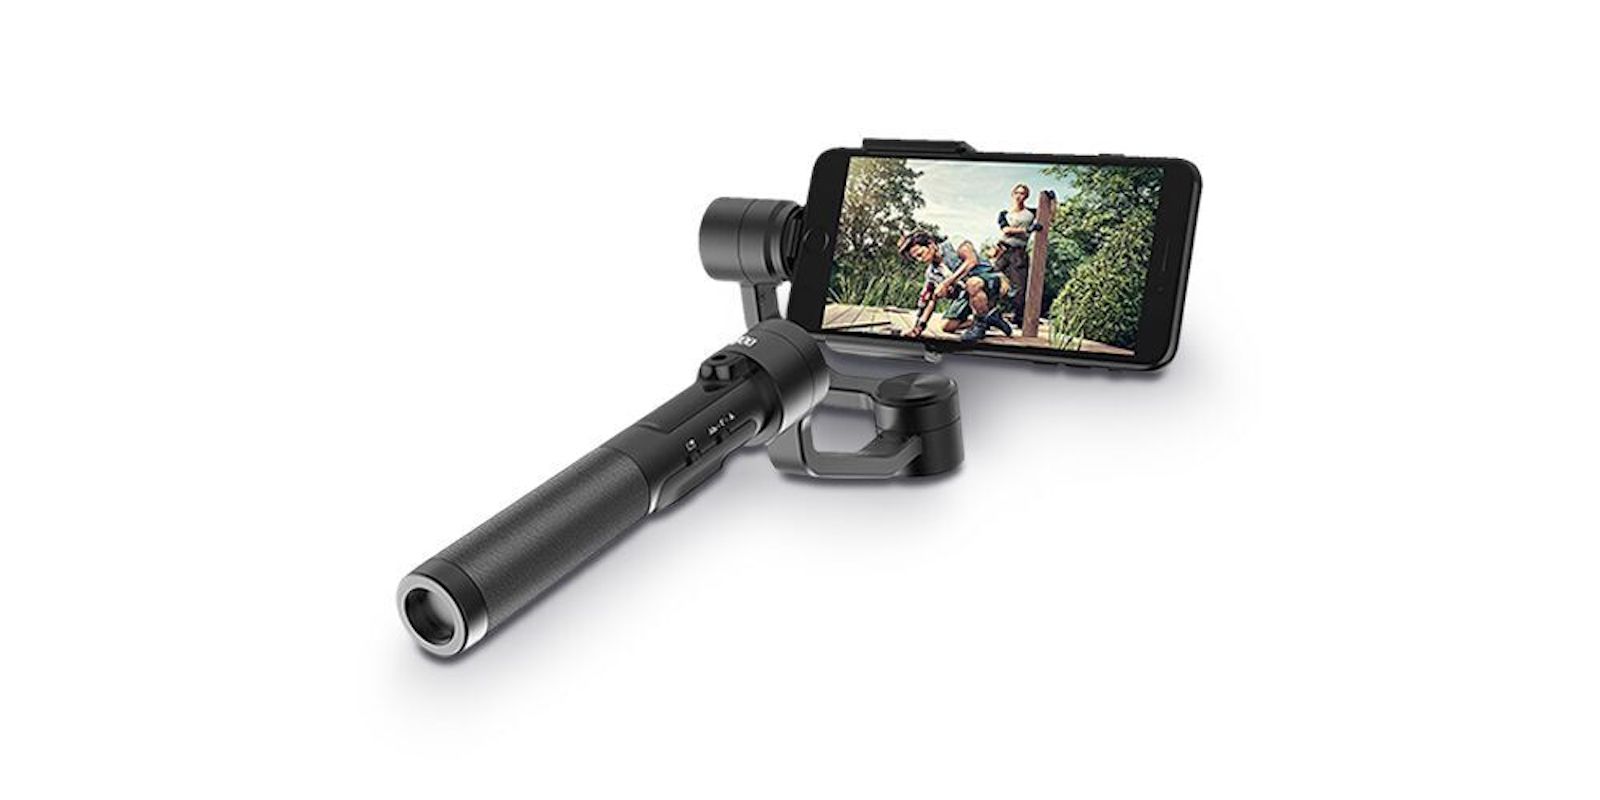 Easily shoot ultra steady video and take crisp photos with this flexible, stable gimbal for iPhone and GoPro.